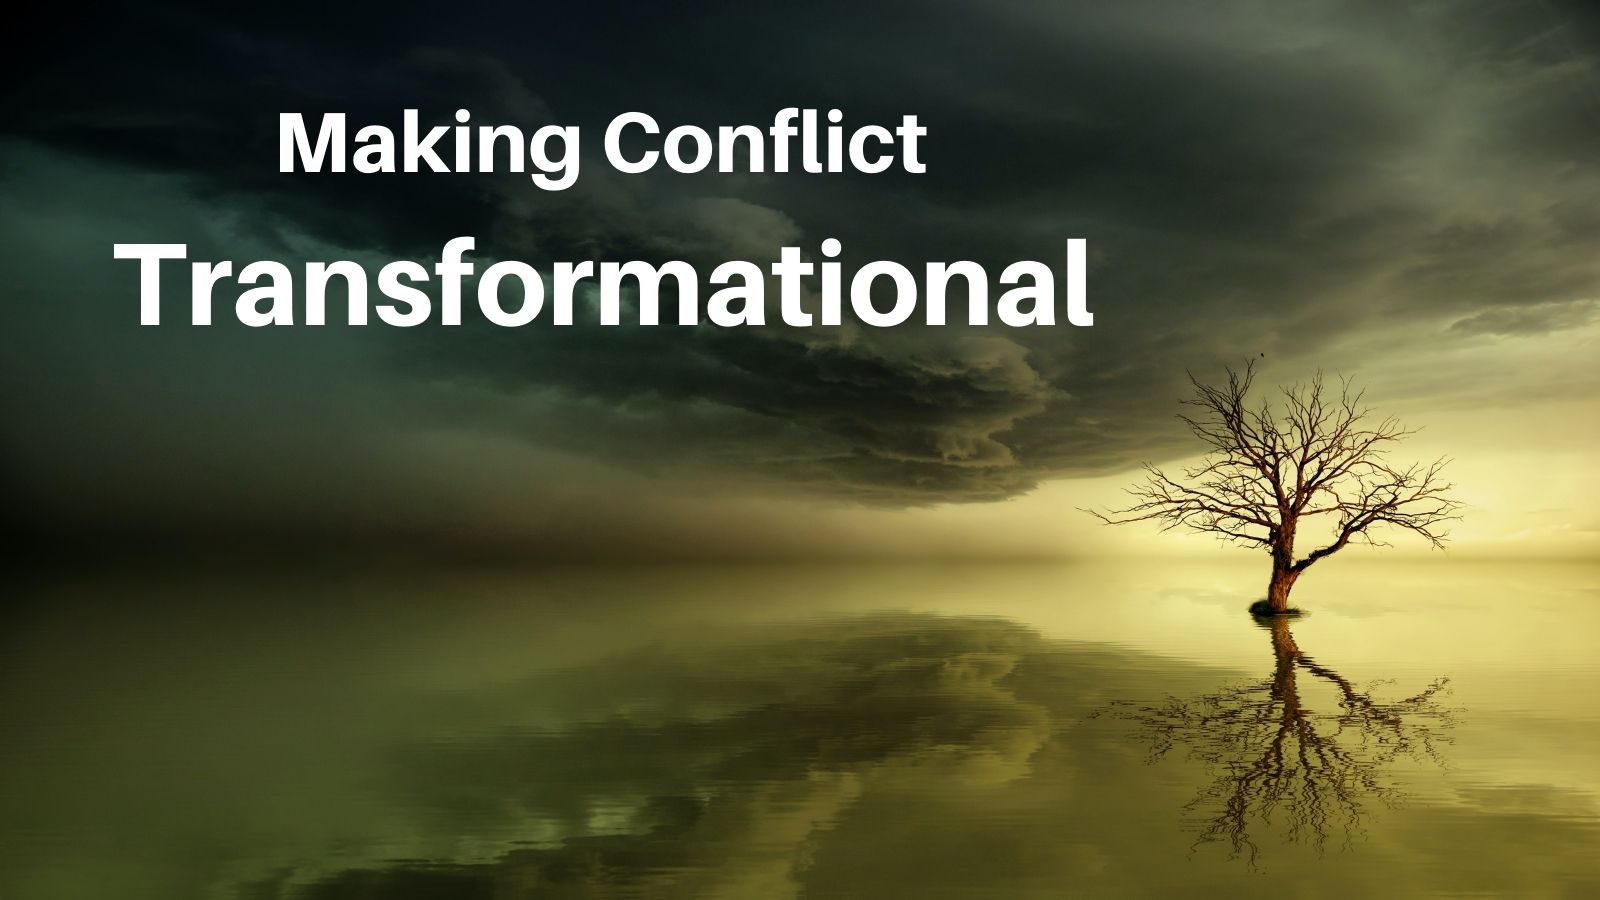 Making conflict transformational